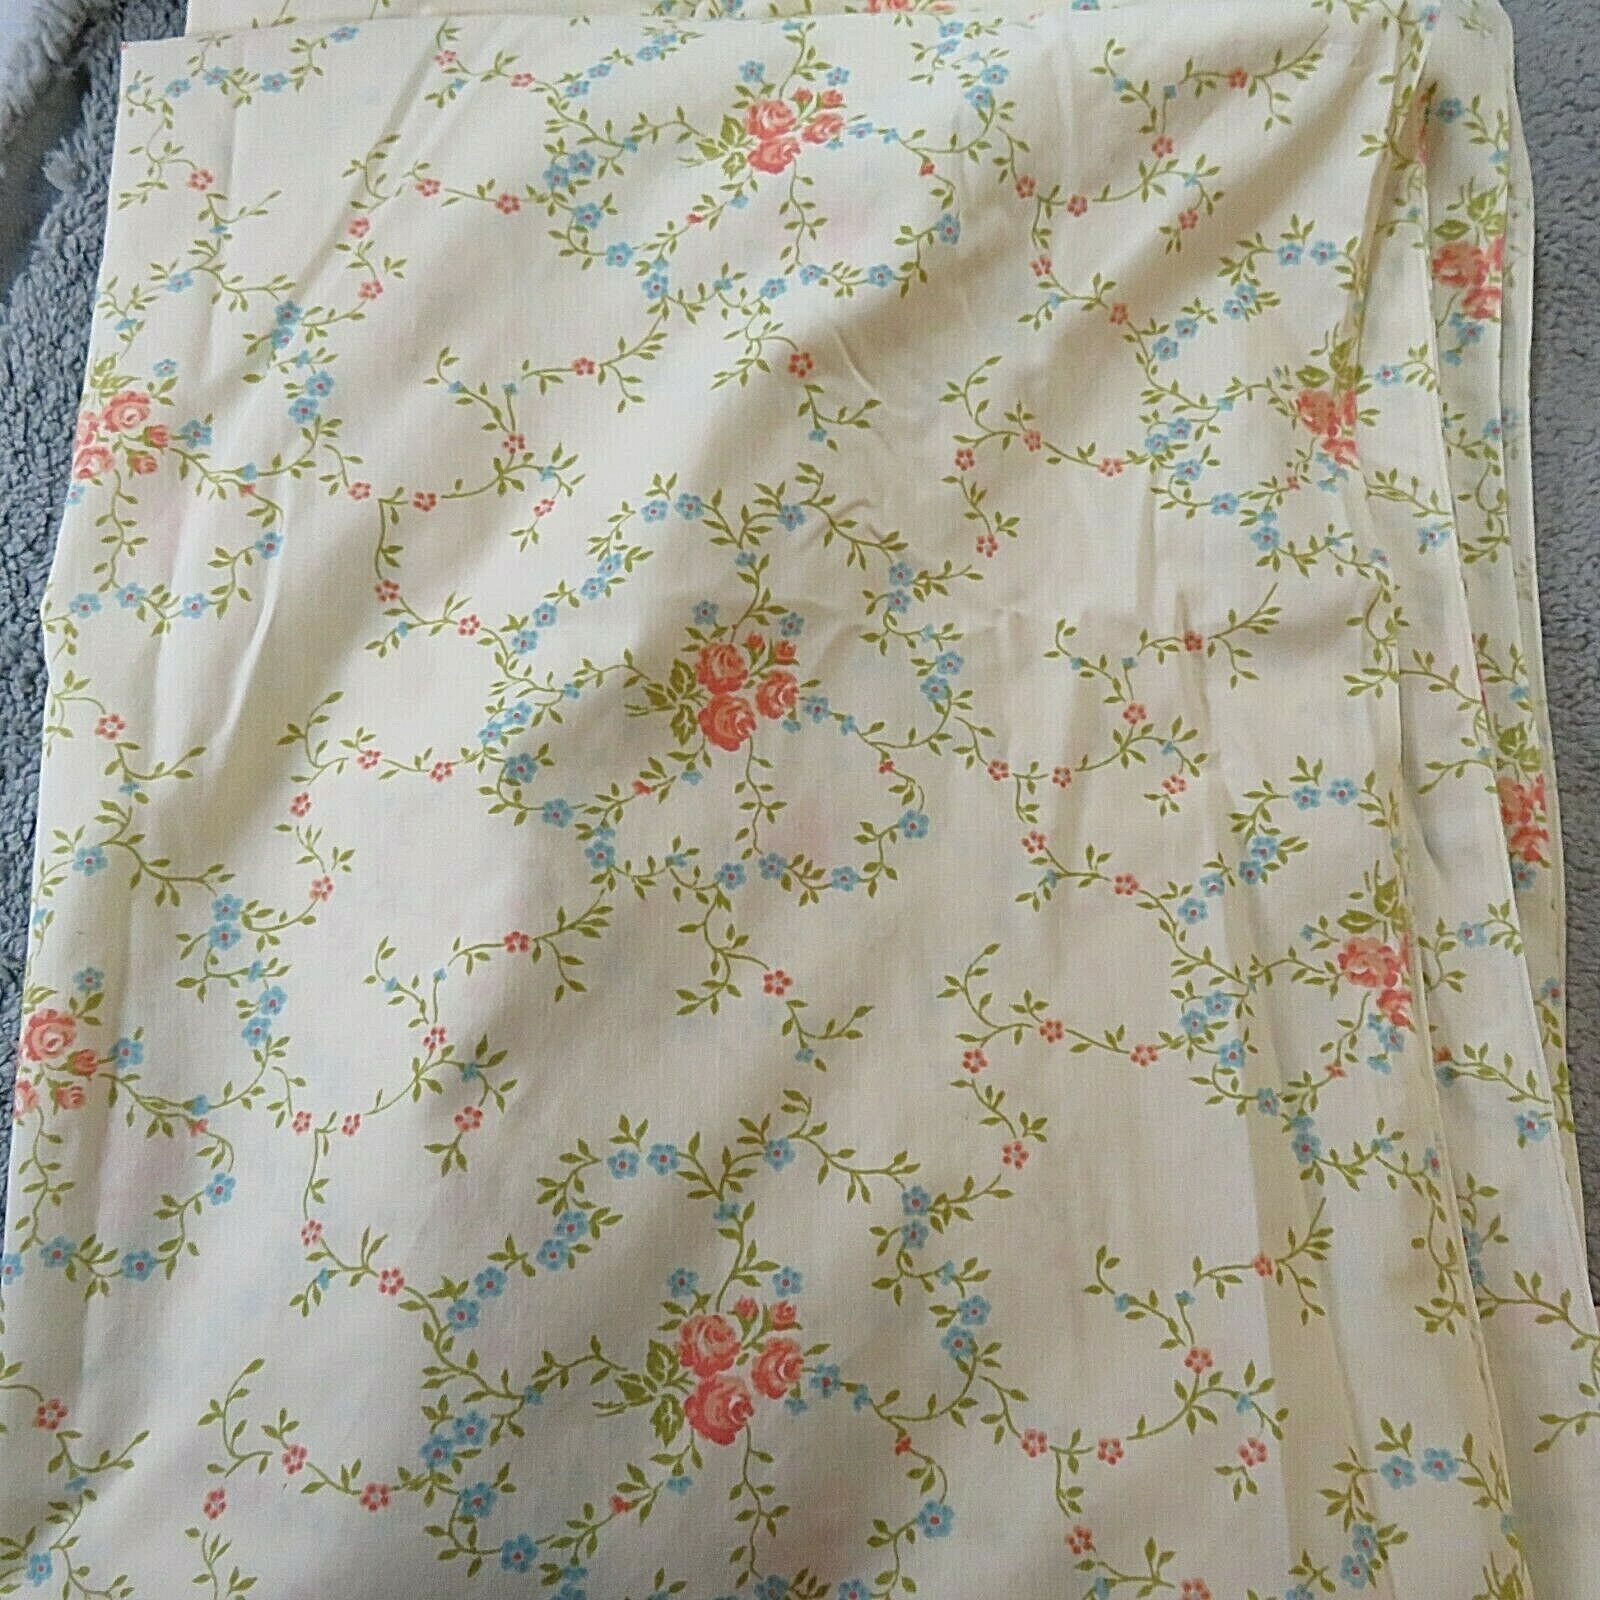 Vintage Twin Flat Bed Sheet Orange Roses Blue Flowers Green Off White Yellowish